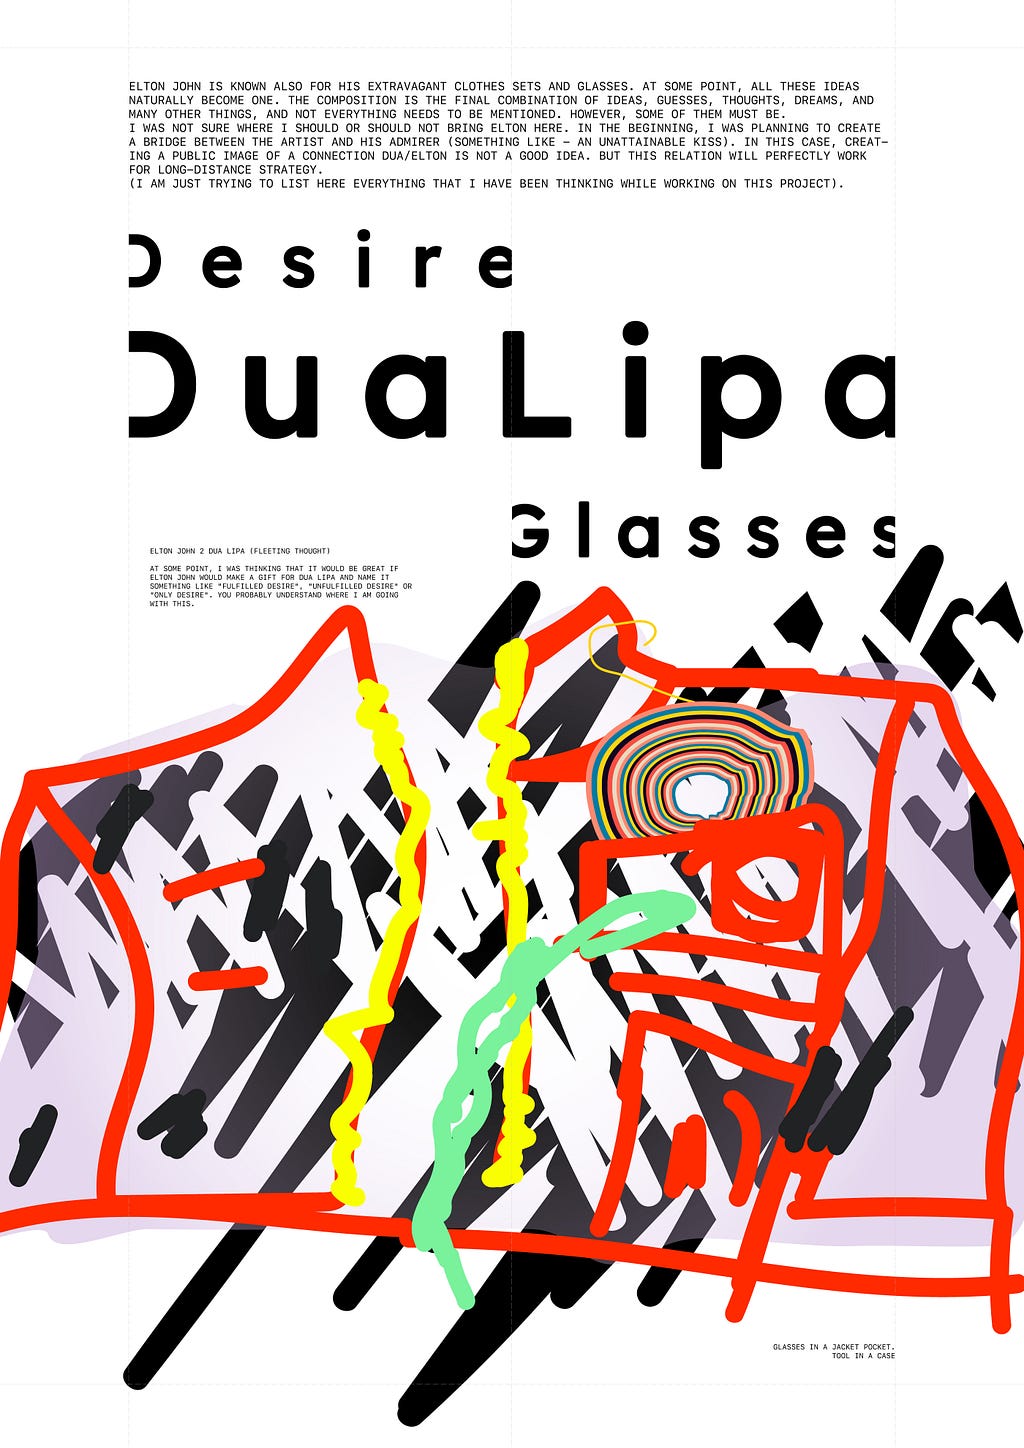 Dua Lipa is an English singer with a high level of sexuality. “Desire” is a glasses gift set for Dua, legendary Elton John, Stefan Sagmeister, and their admirers.